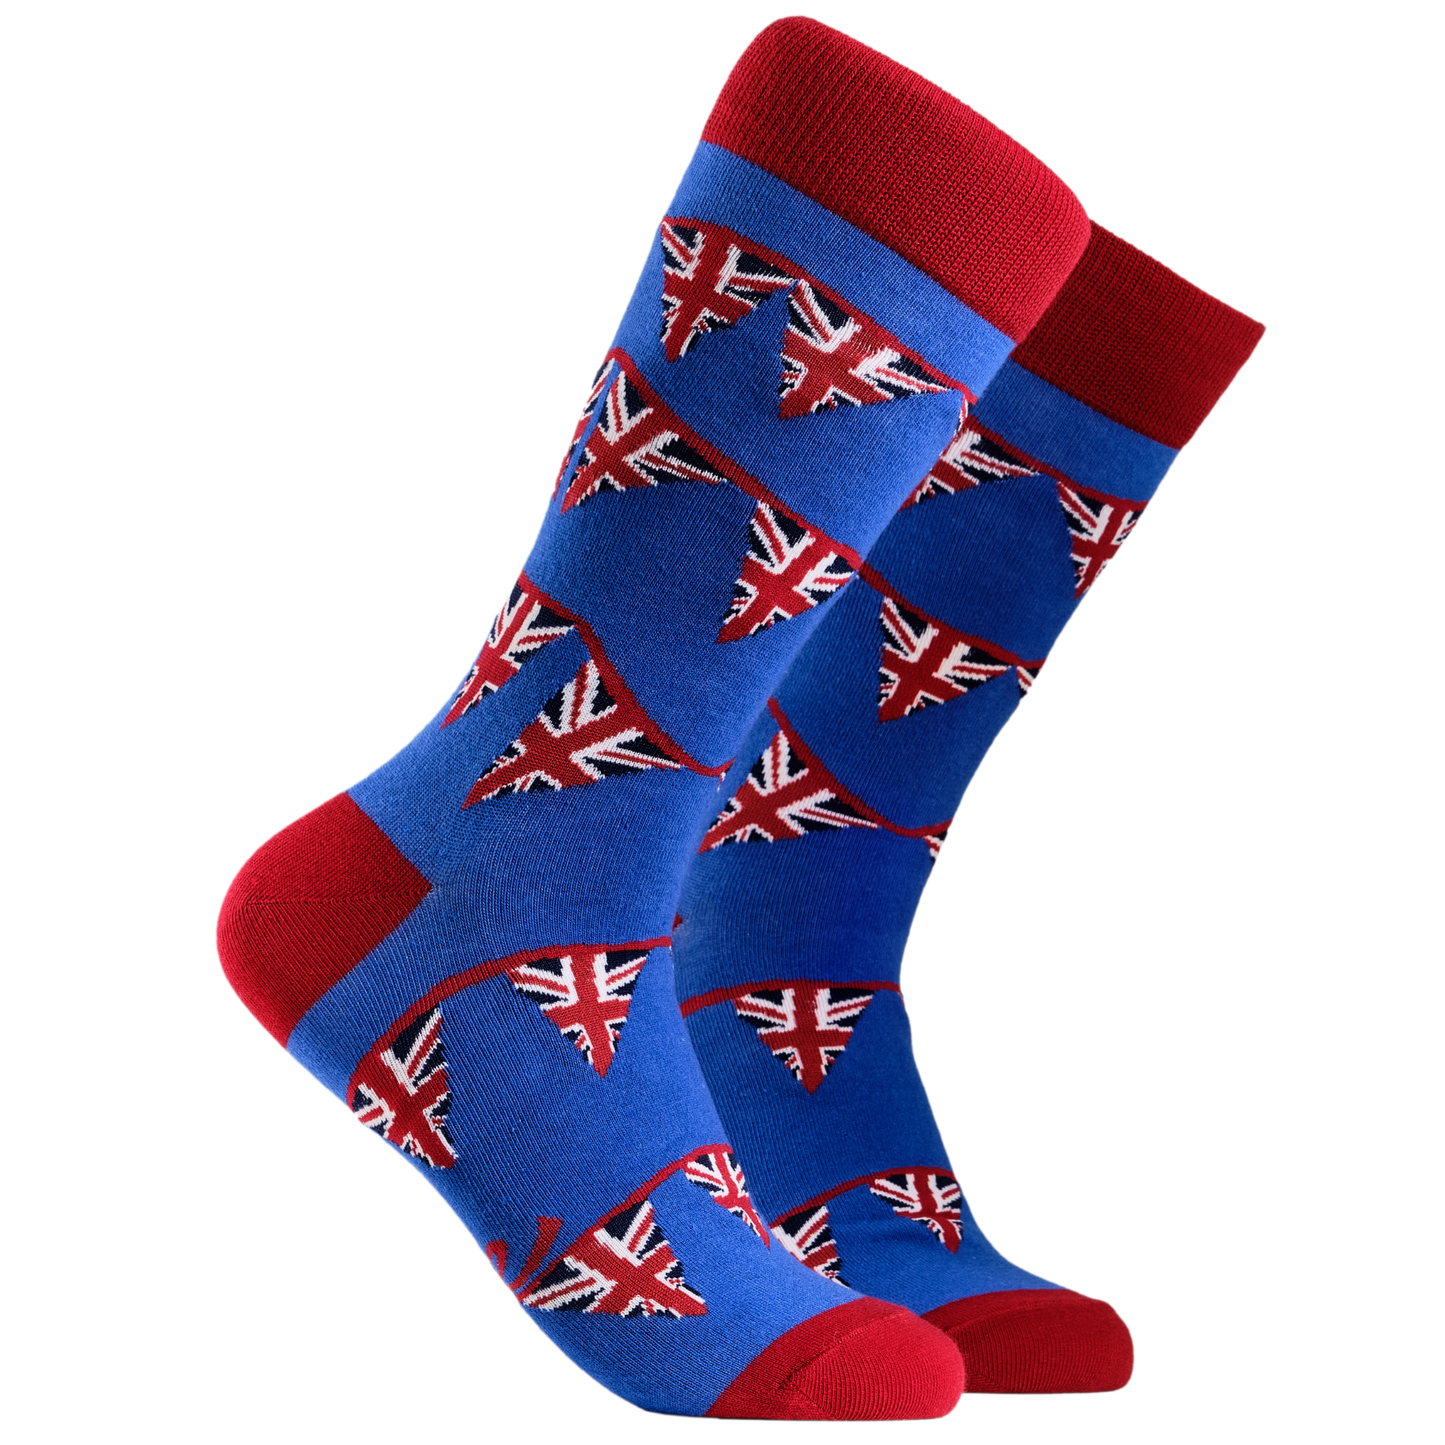 Union Jack Socks - UK Bunting. A pair of socks depicting Union Jack bunting. Blue legs, red cuff, heel and toe.